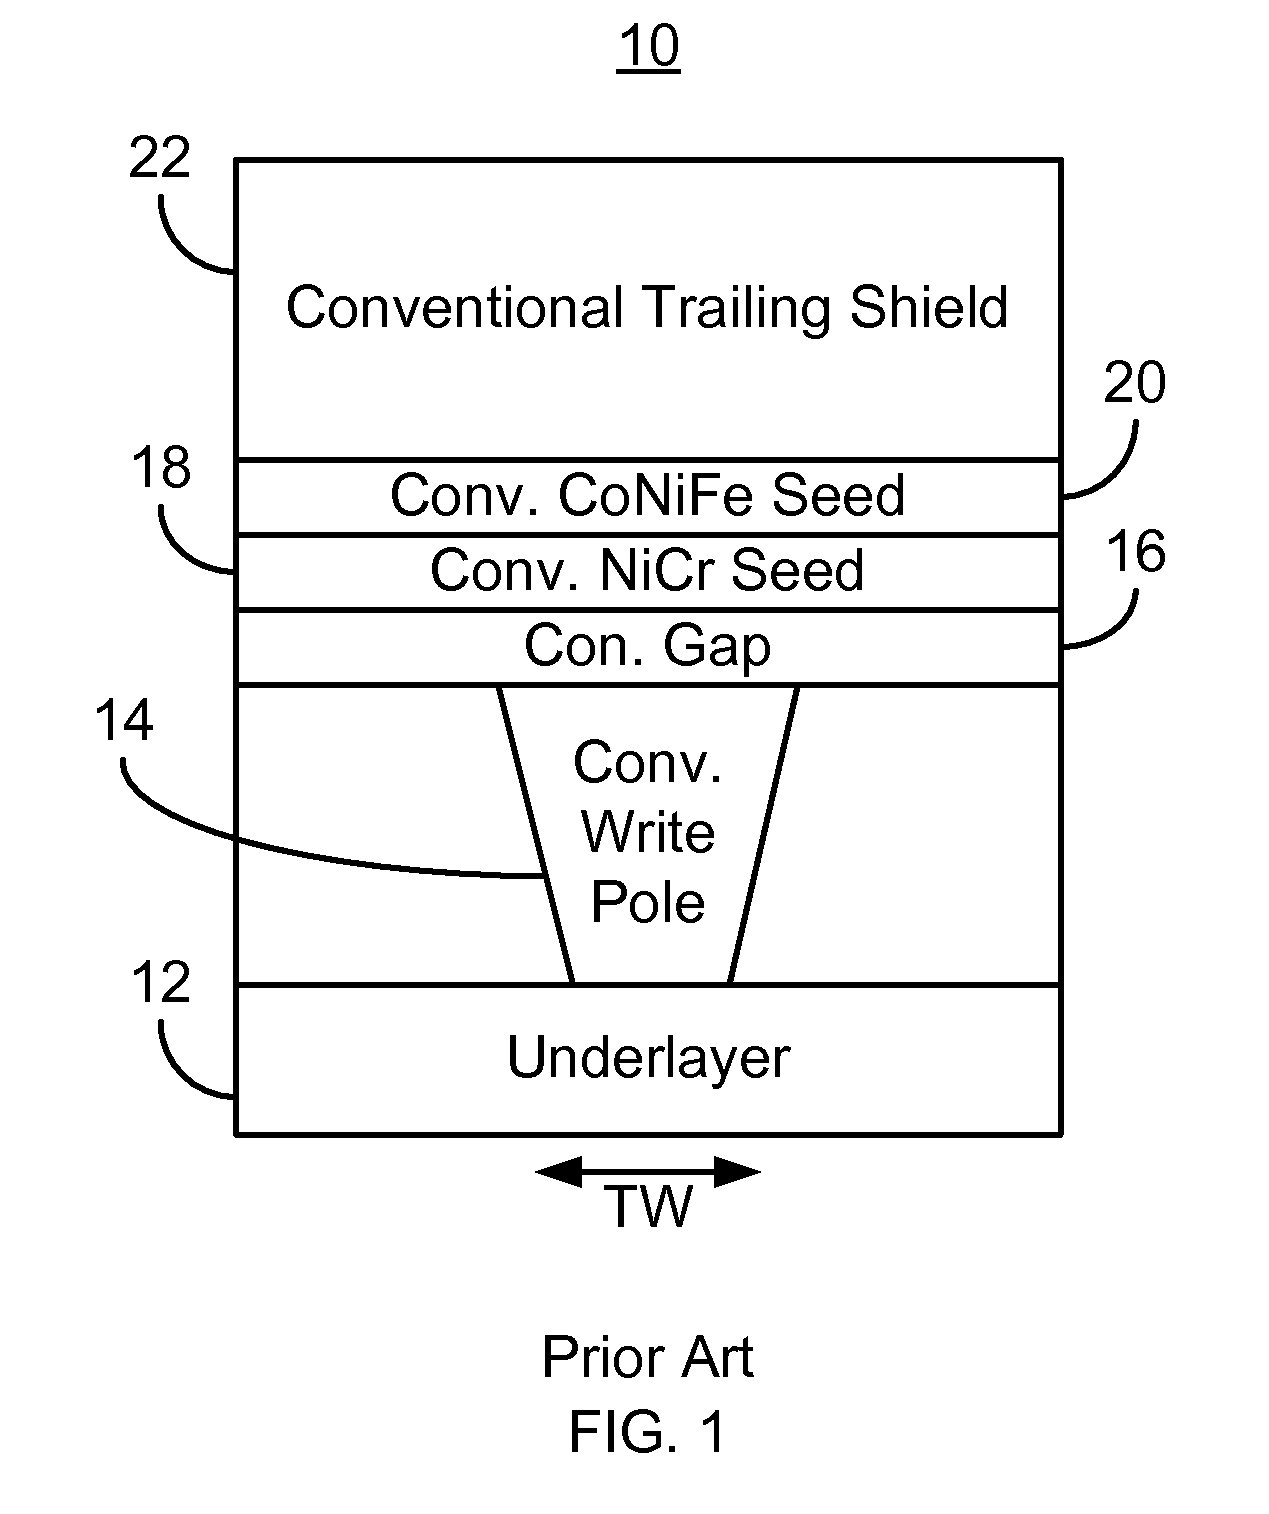 Method and system for providing a magnetic transducer having a high moment bilayer magnetic seed layer for a trailing shield